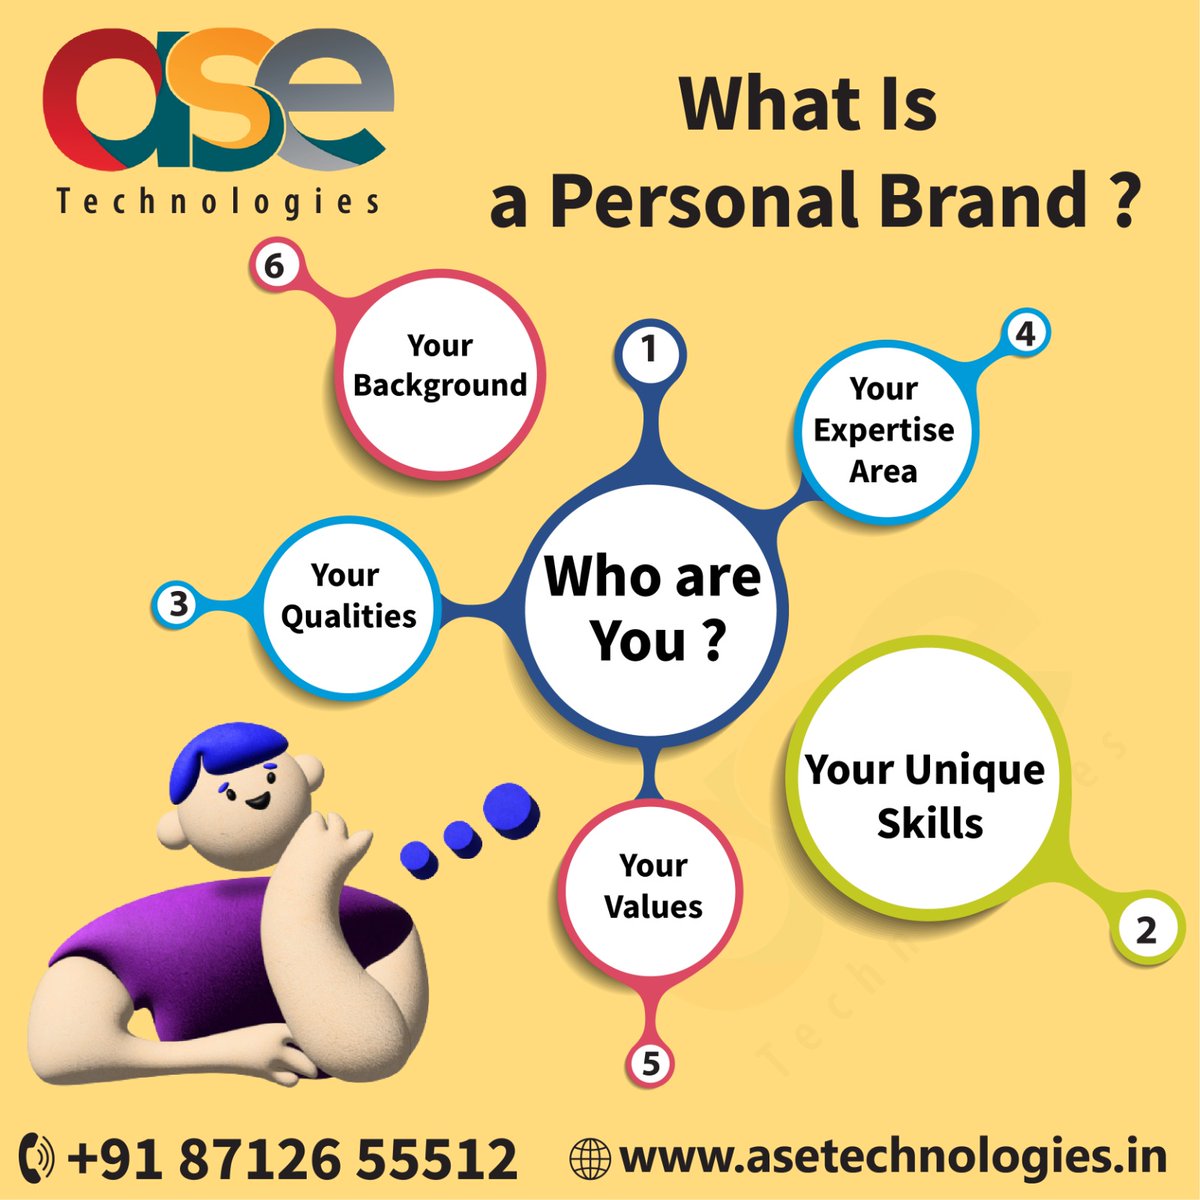 Personal branding is not just about marketing but about being your marketer

reach us : asetechnologies.in

#asetechnologies #vizag #business #socialmedia #personalbranding #brandingtips #marketing #digitalmarketing #branding #personalgrowth #personaldevelopement #content